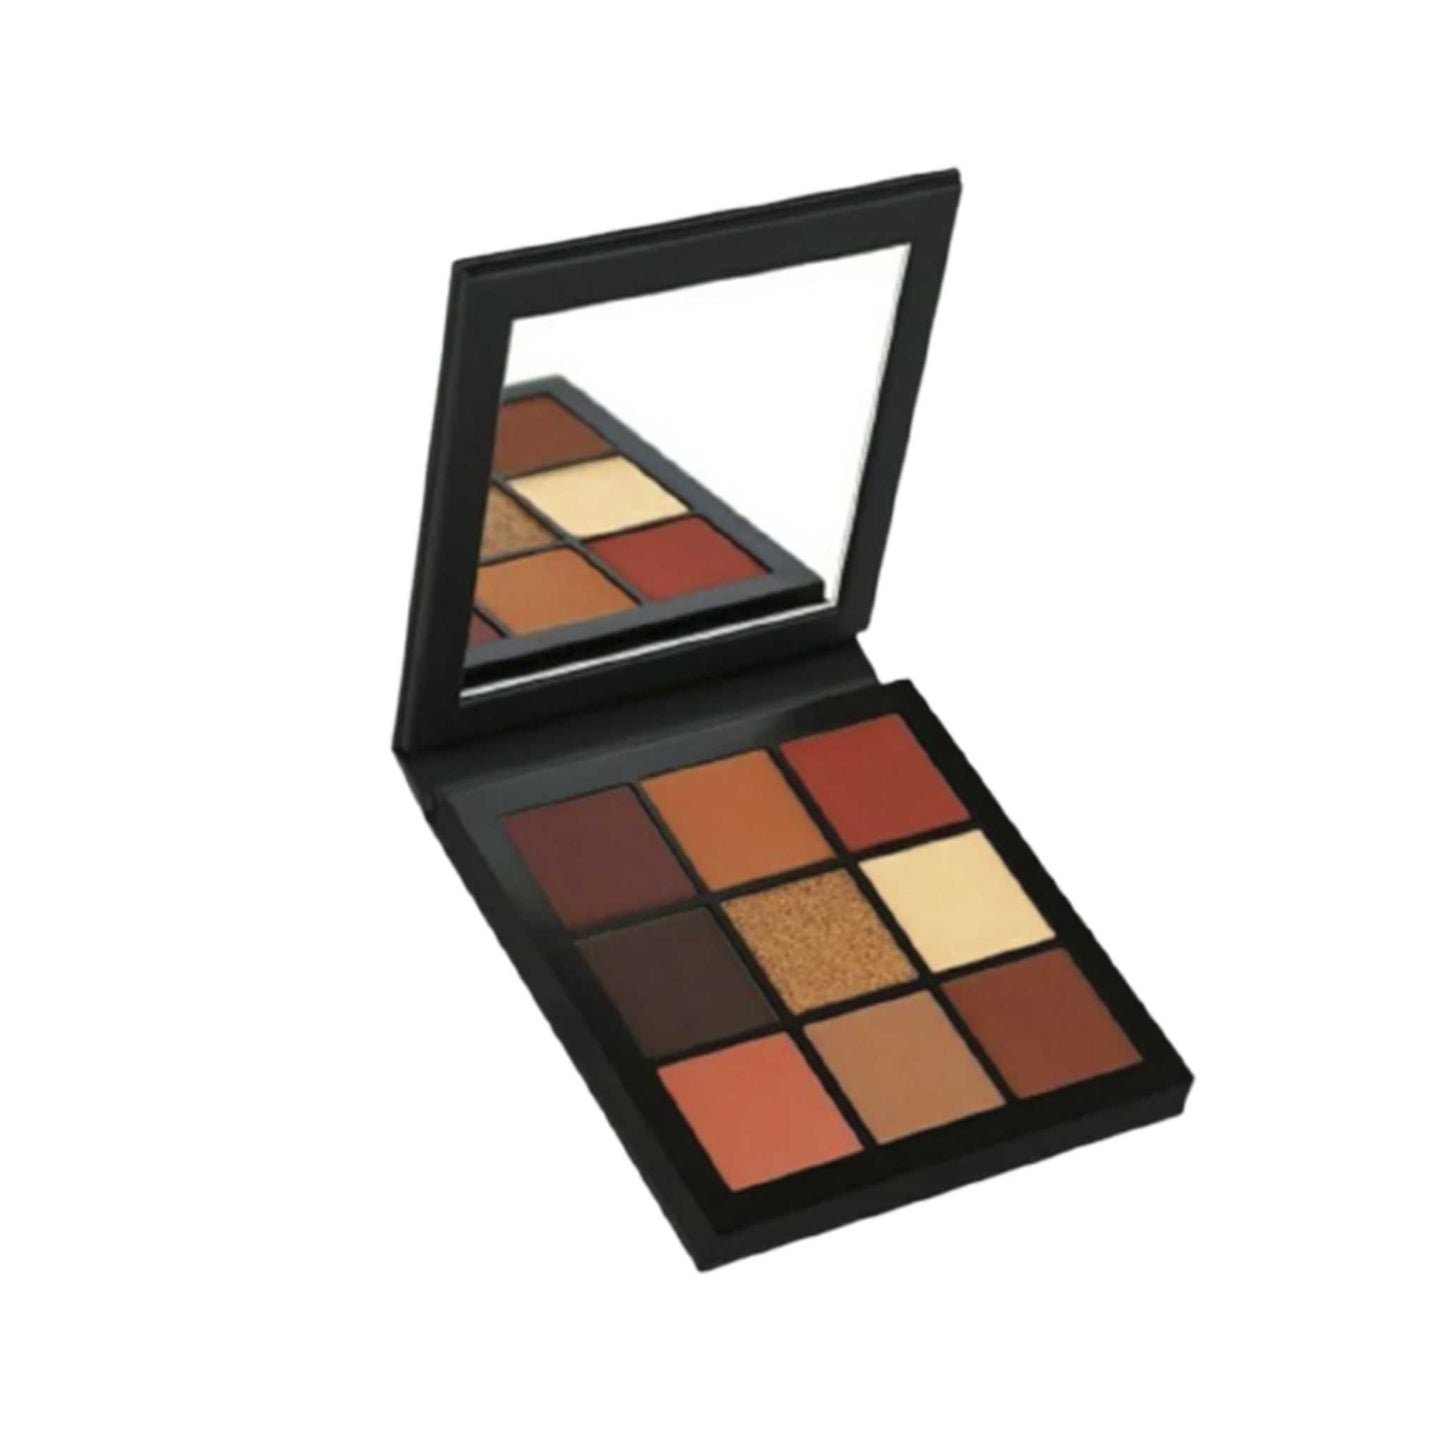 Huda Beauty Warm Brown Obsessions Palette The BoxCompany